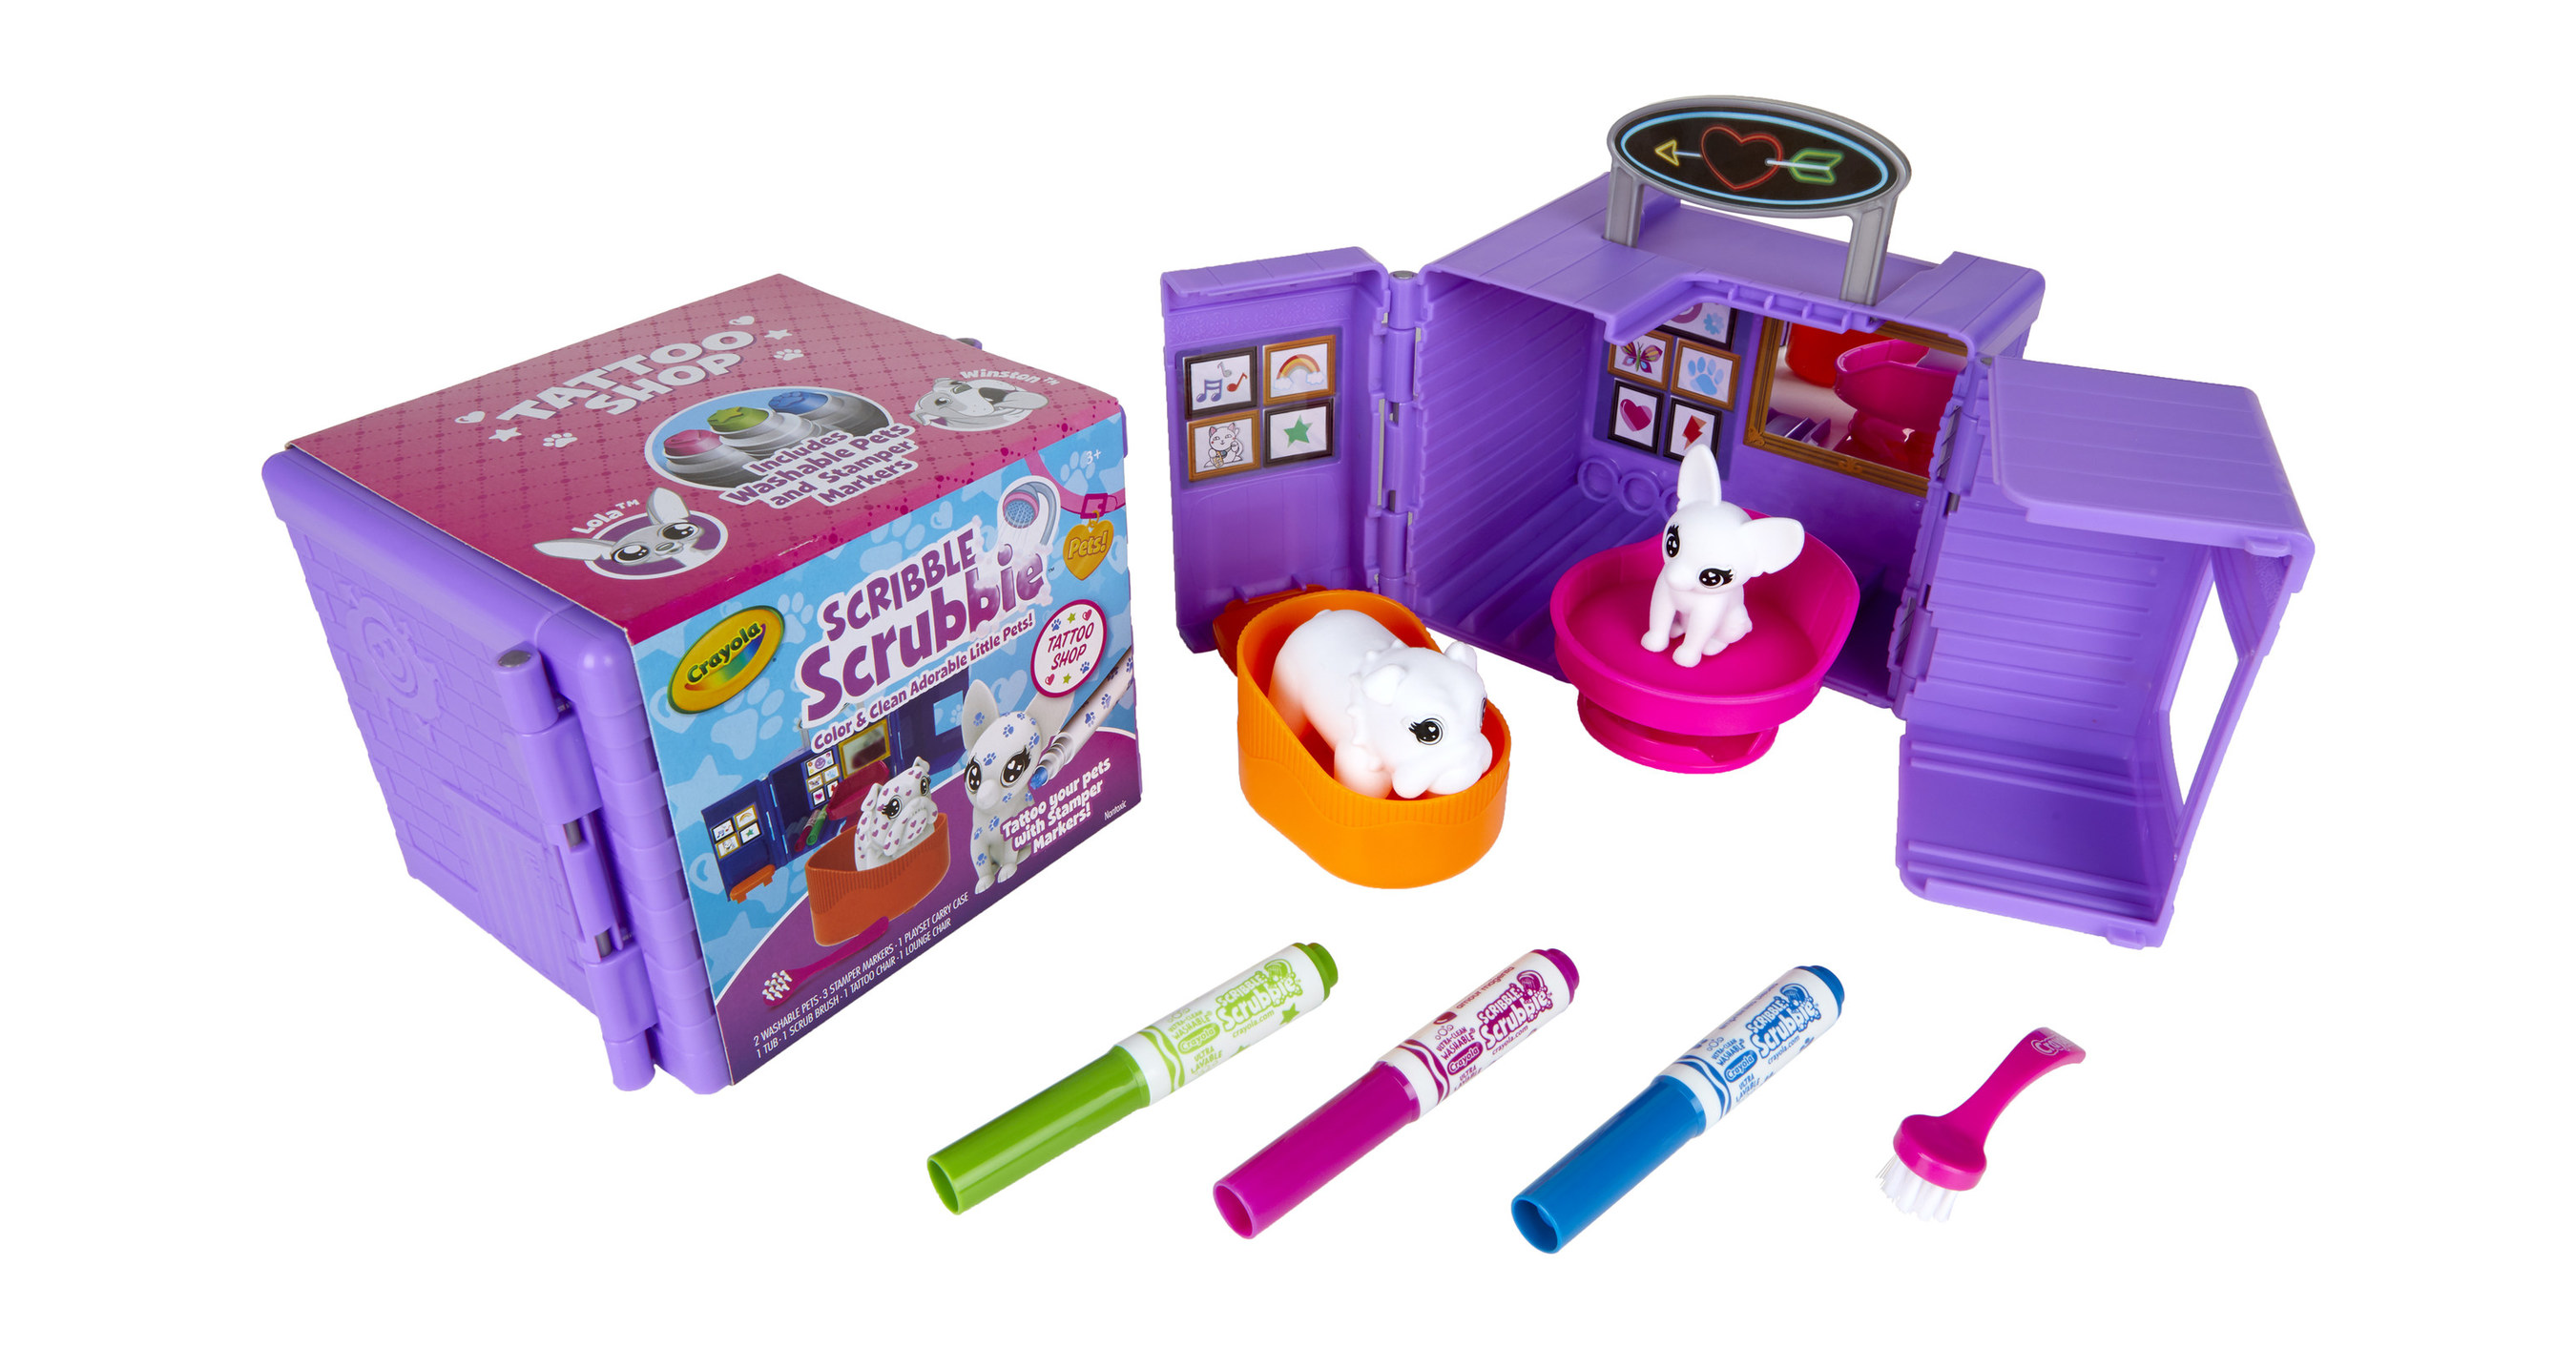 Crayola Introduces New Scribble Scrubbie Pets, Glitter Dots Kits